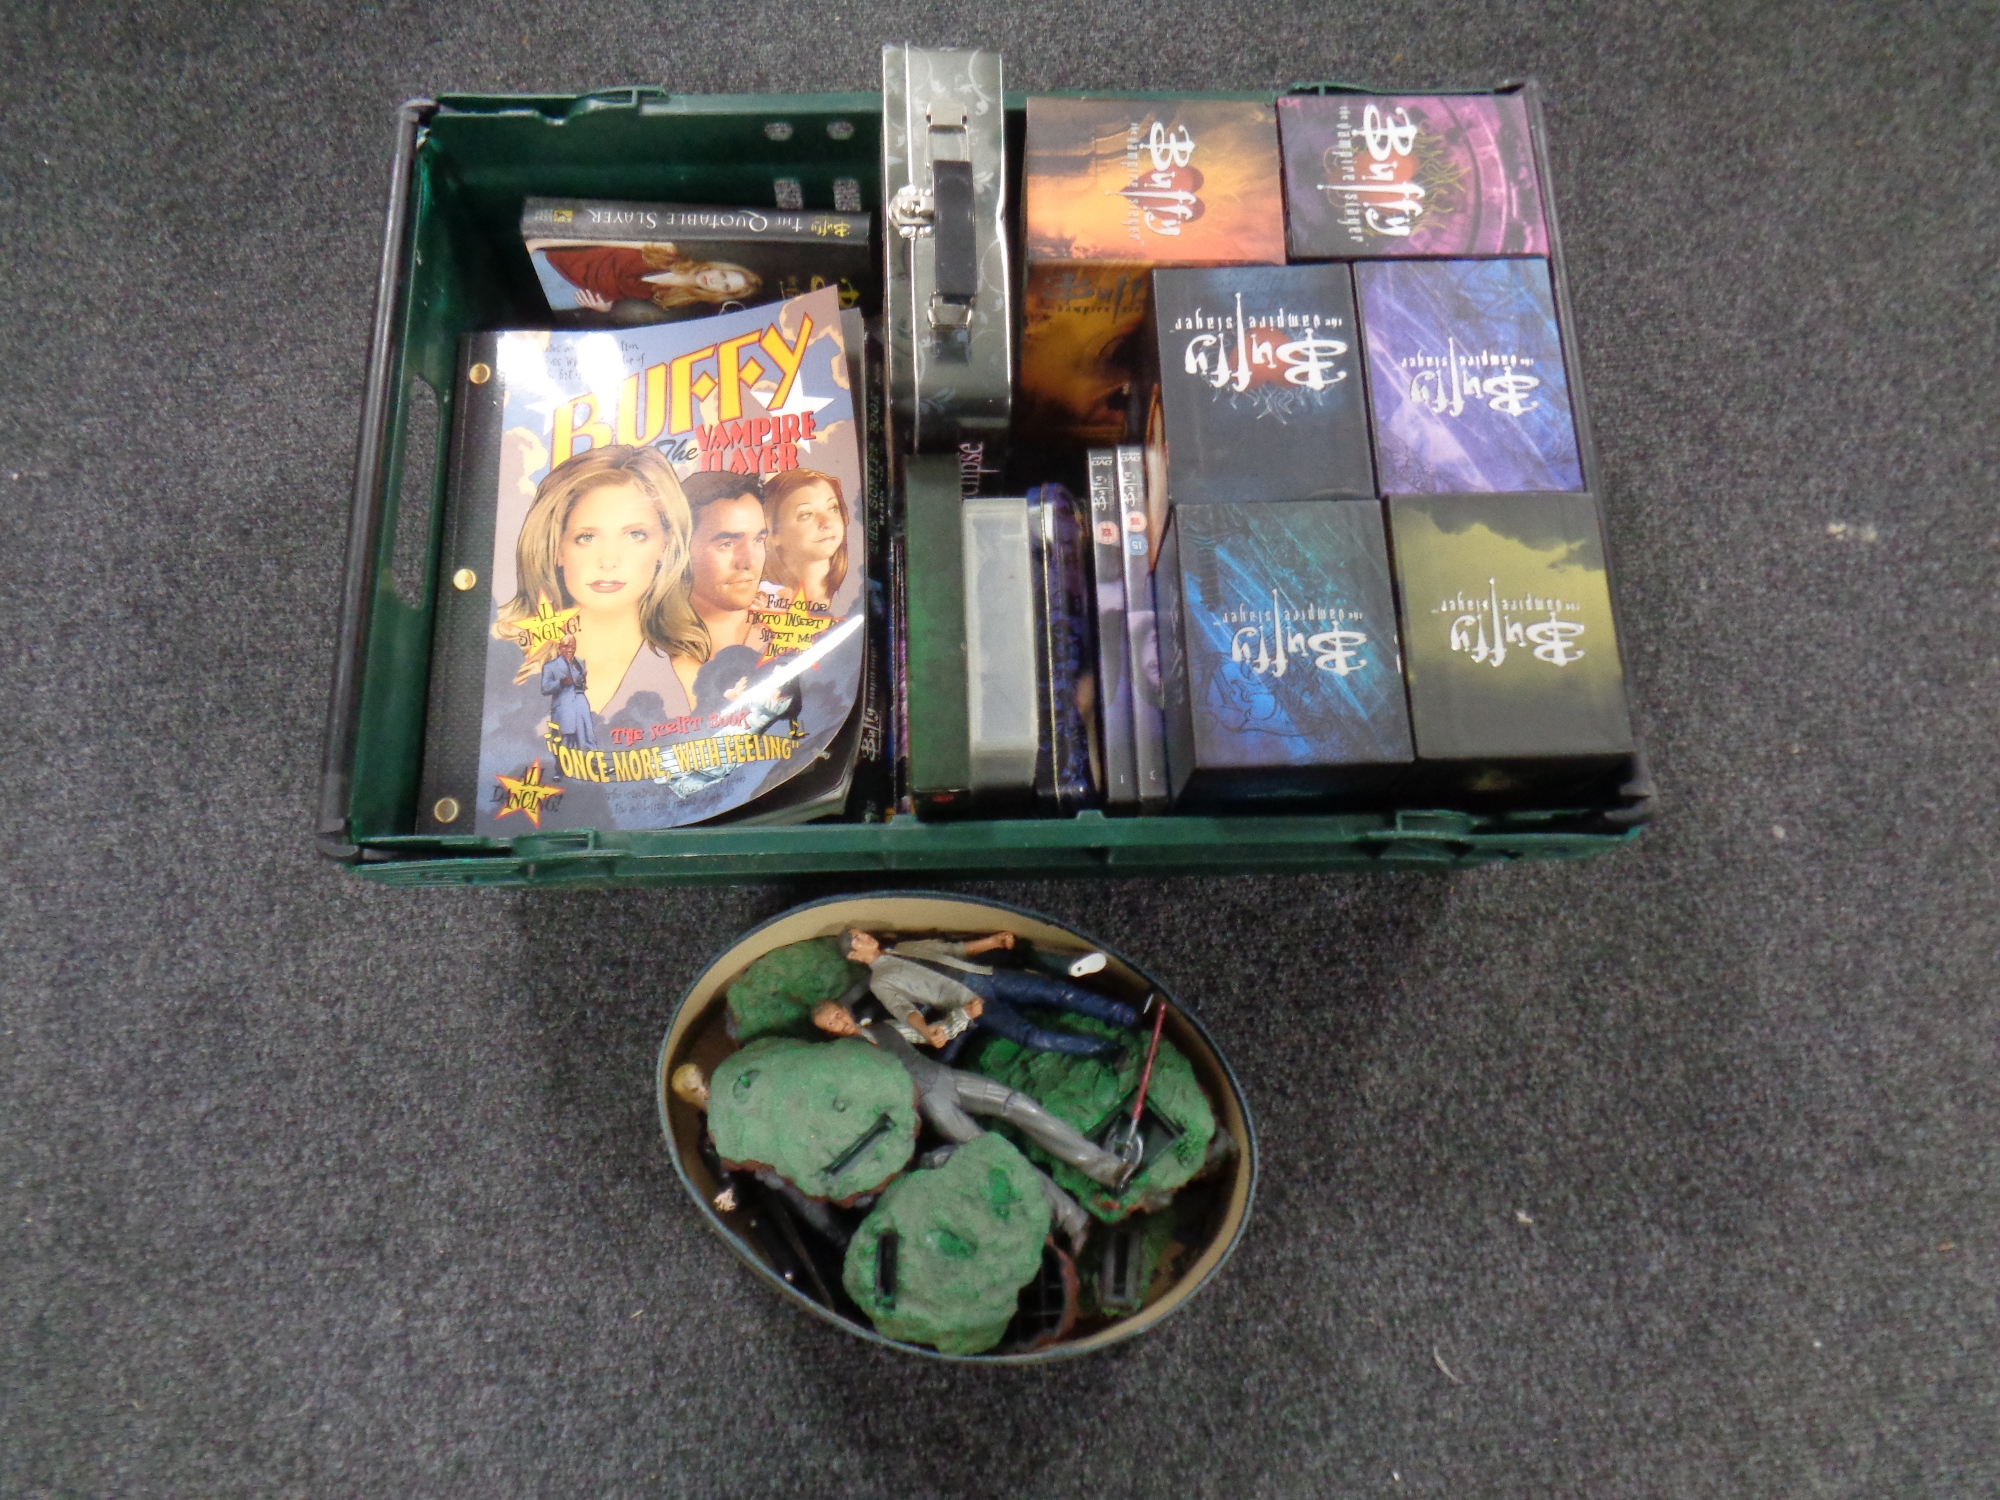 A box containing DVDs and VHS tapes including Buffy script,